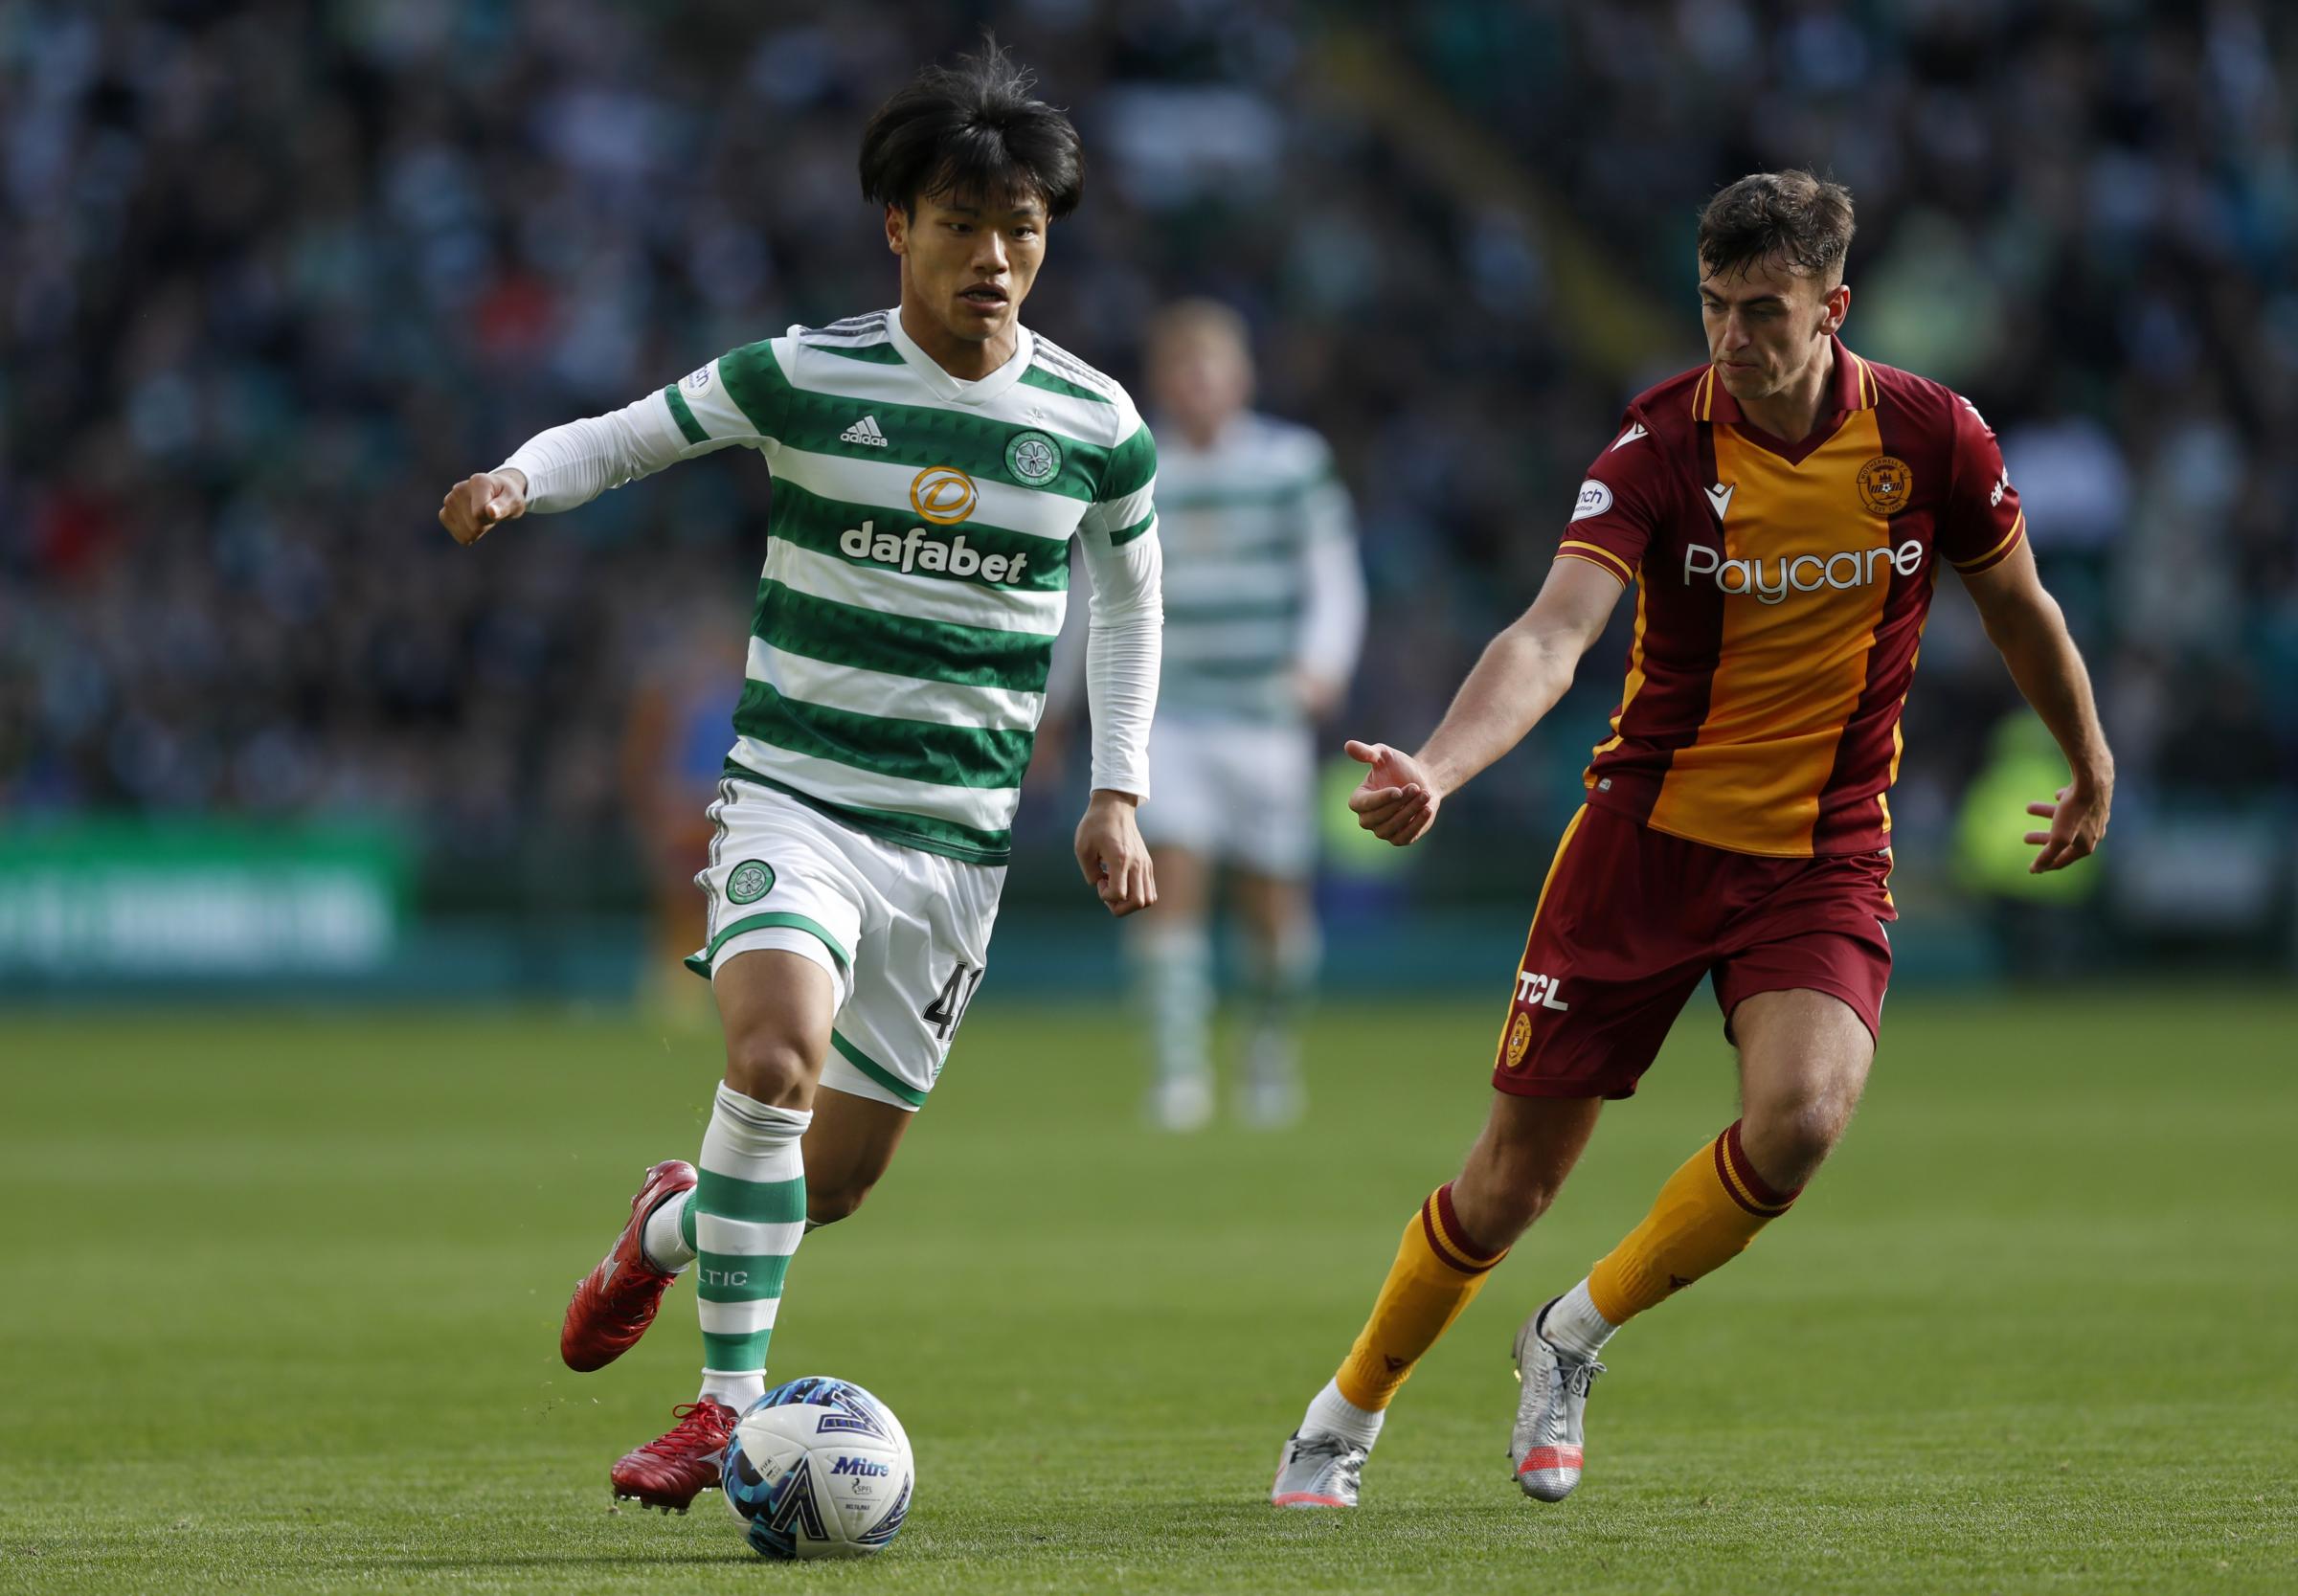 Nervy Celtic make a meal of Motherwell, but secure crucial win in the end